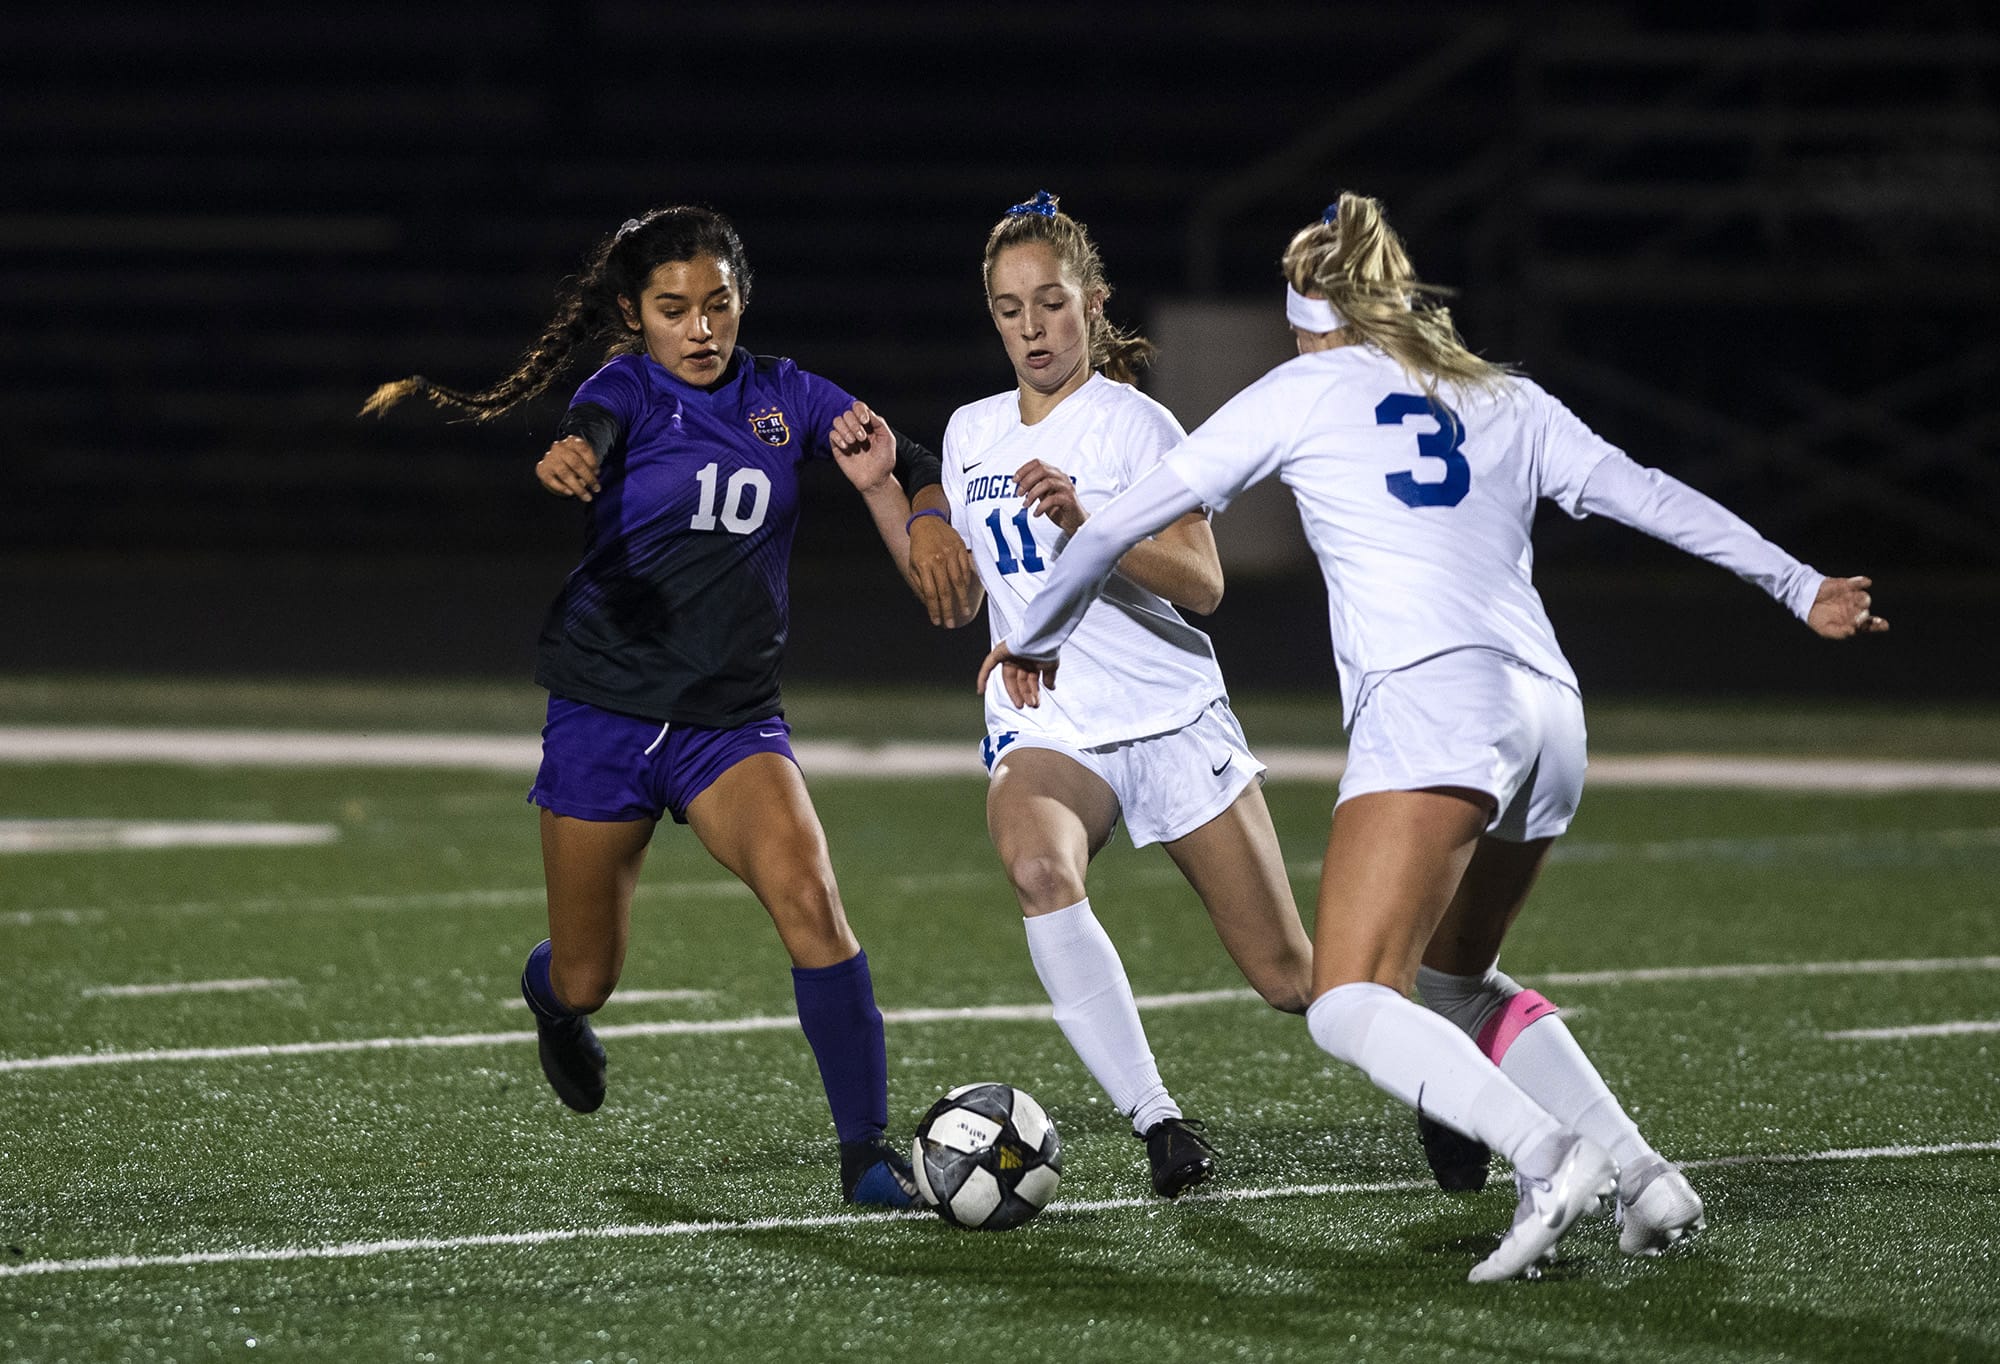 Columbia RiverÕs Yaneisy Rodriguez (10) fights for the ball against RidgefieldÕs Claire Jones (11) during the 2A district championship at Columbia River High School in Vancouver on Nov. 7, 2019. Ridgefield won 2-1.